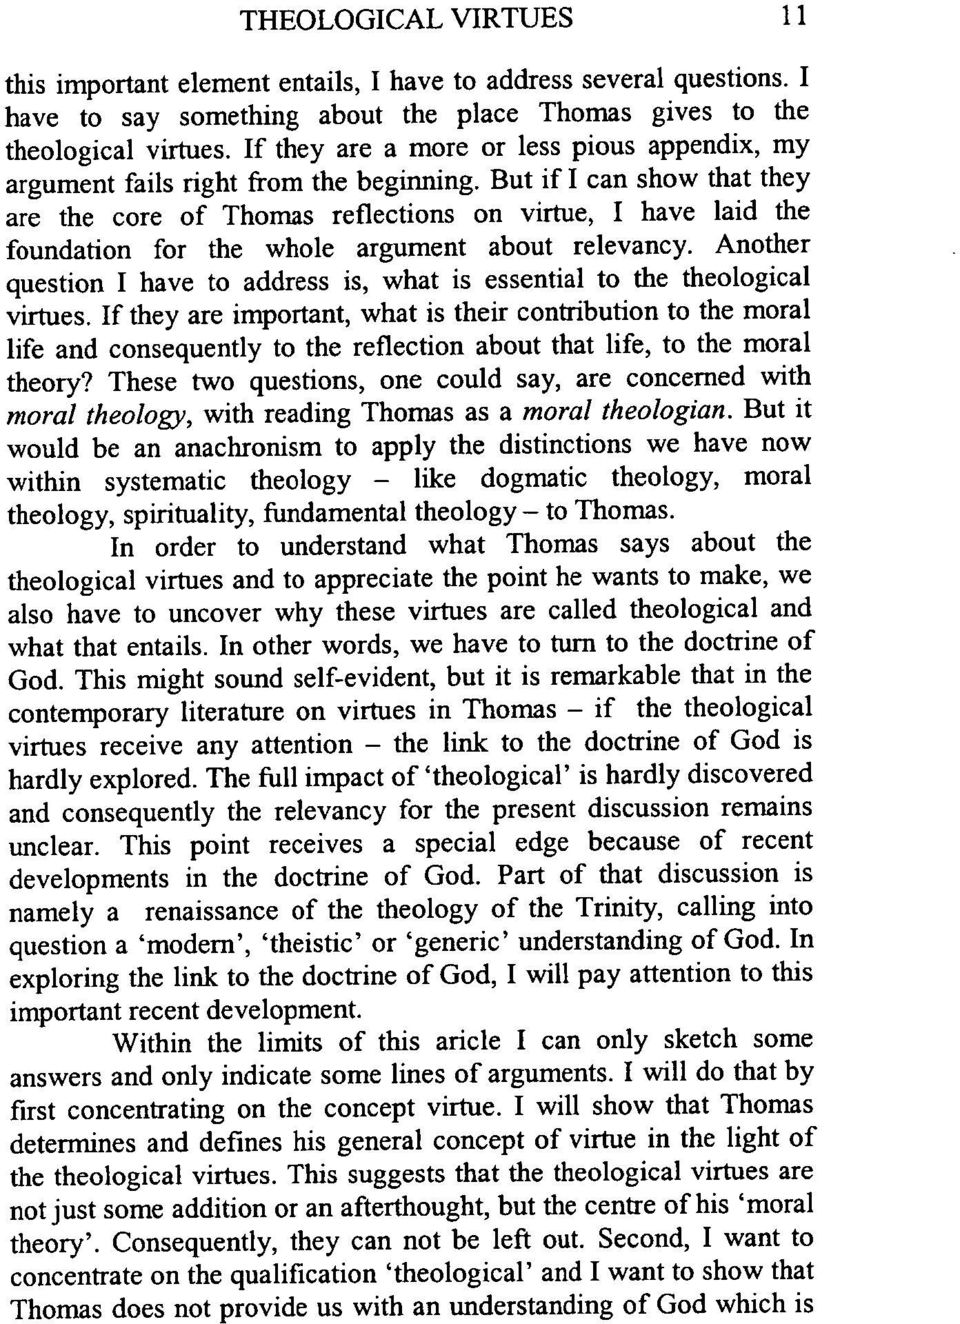 But if I can show that they are the core of Thomas reflections on virtue, I have laid the foundation for the whole argument about relevancy.